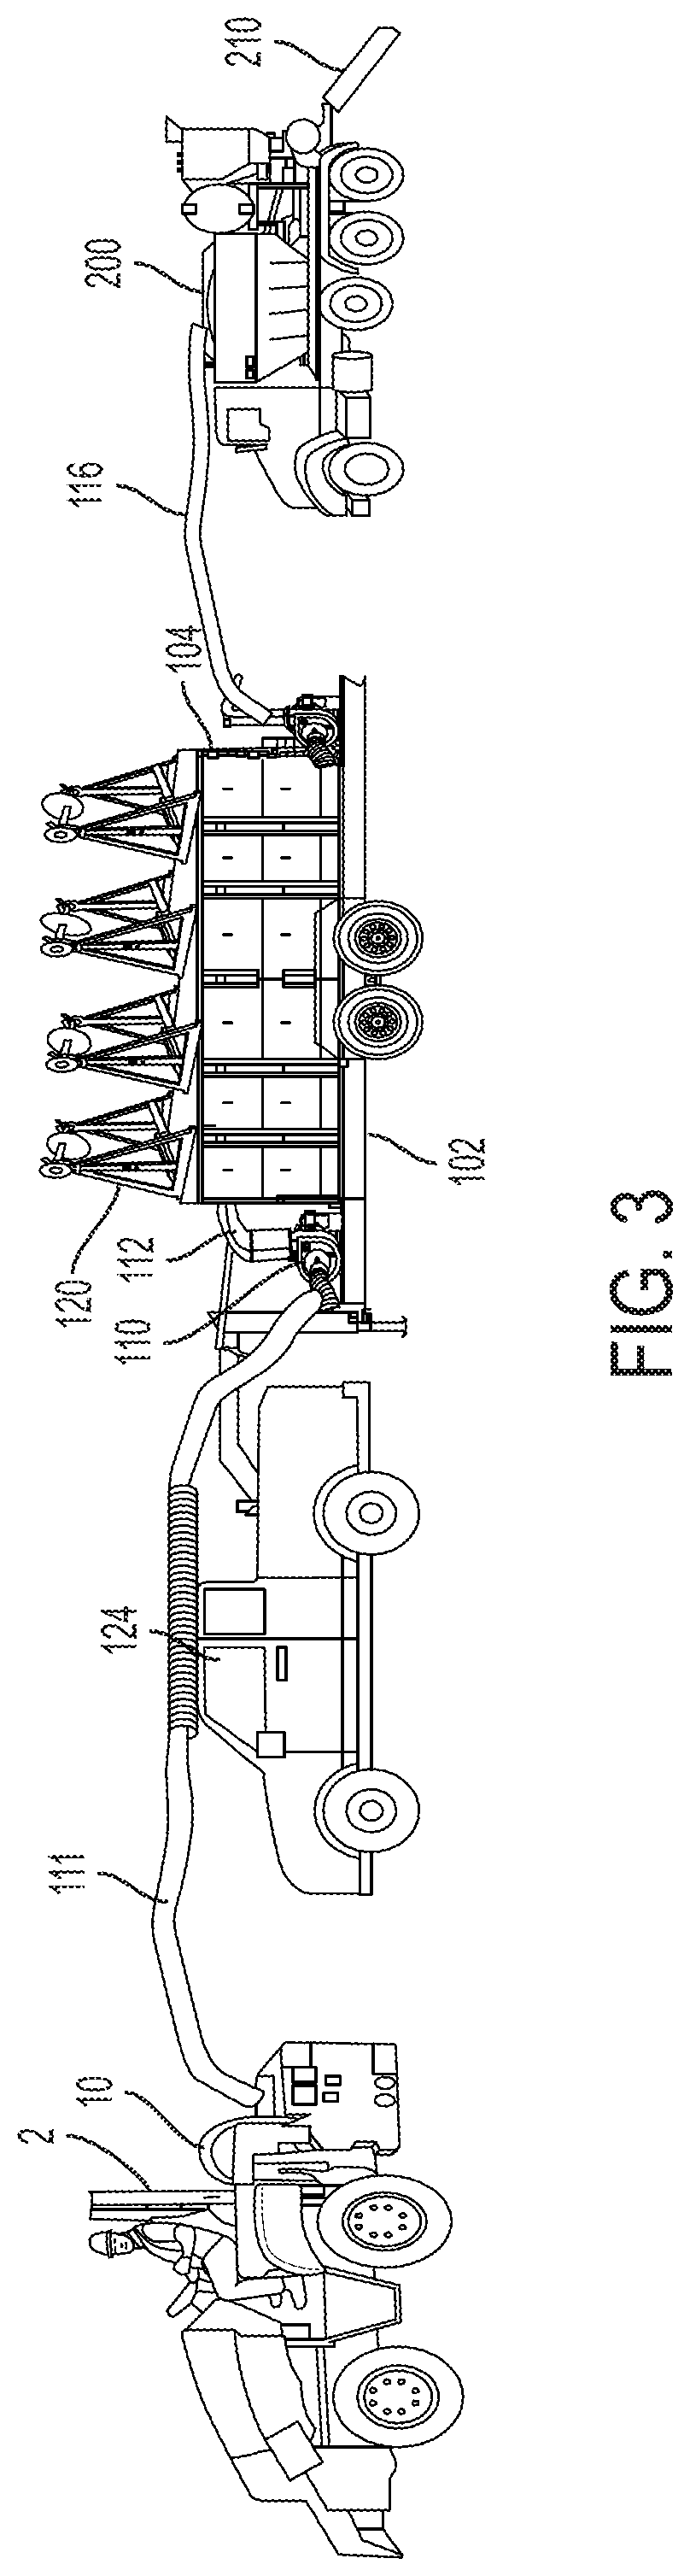 Microtrencher having a utility avoidance safety device and method of microtrenching